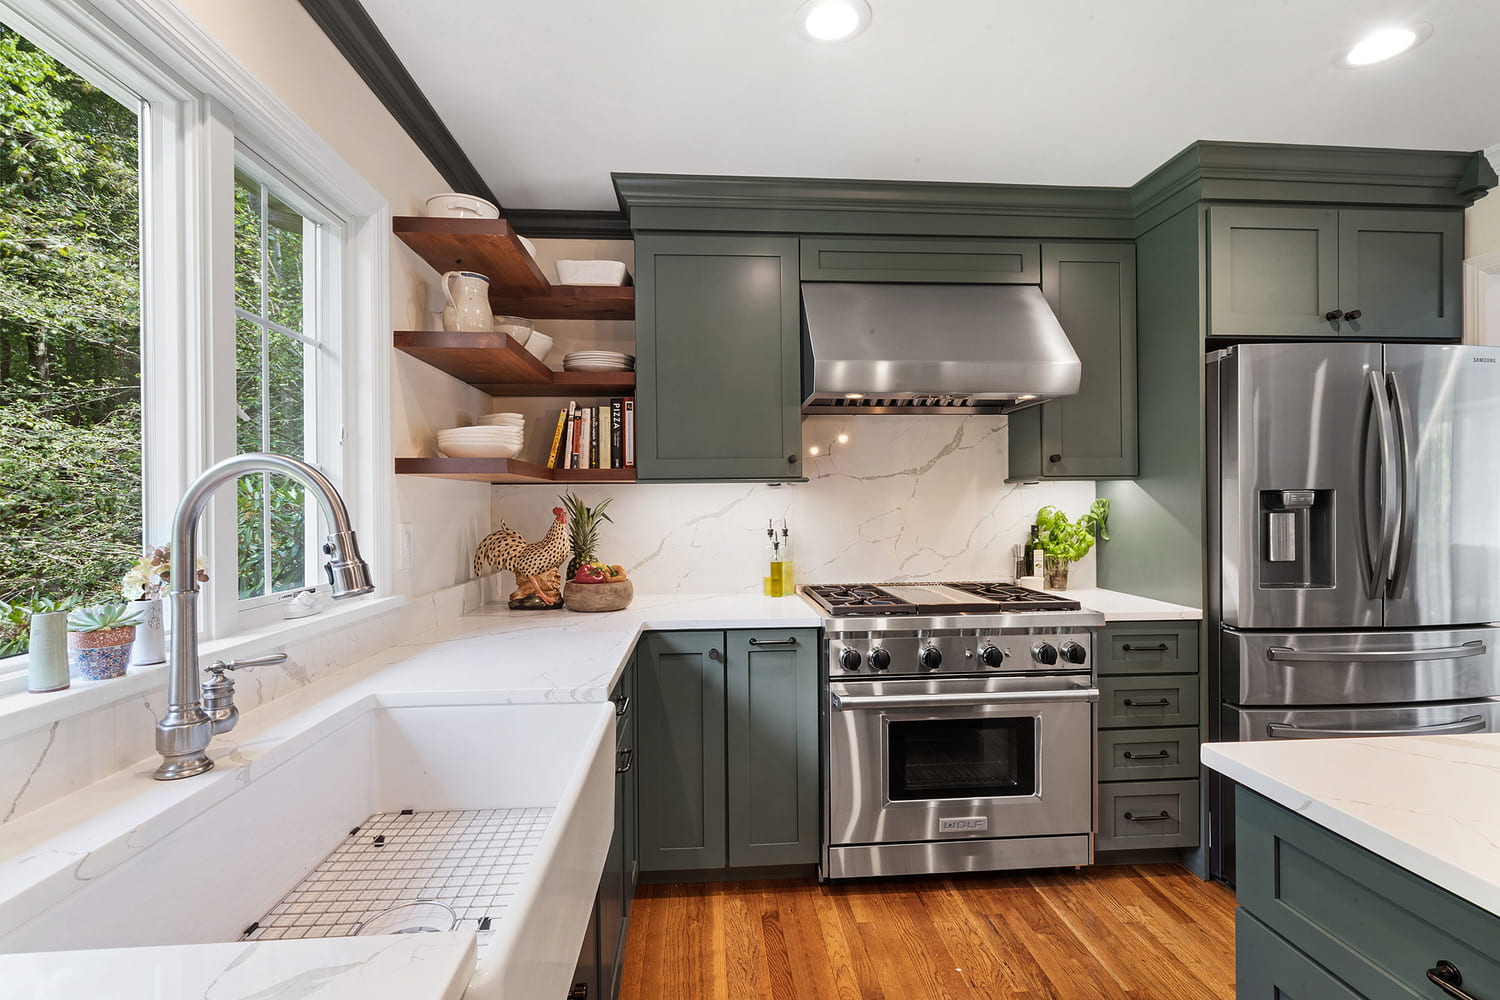 Mendham farmhouse kitchen remodel with lily pad green shaker cabinet doors, quartz and butcher block with farmhouse sink and Anderson windows.